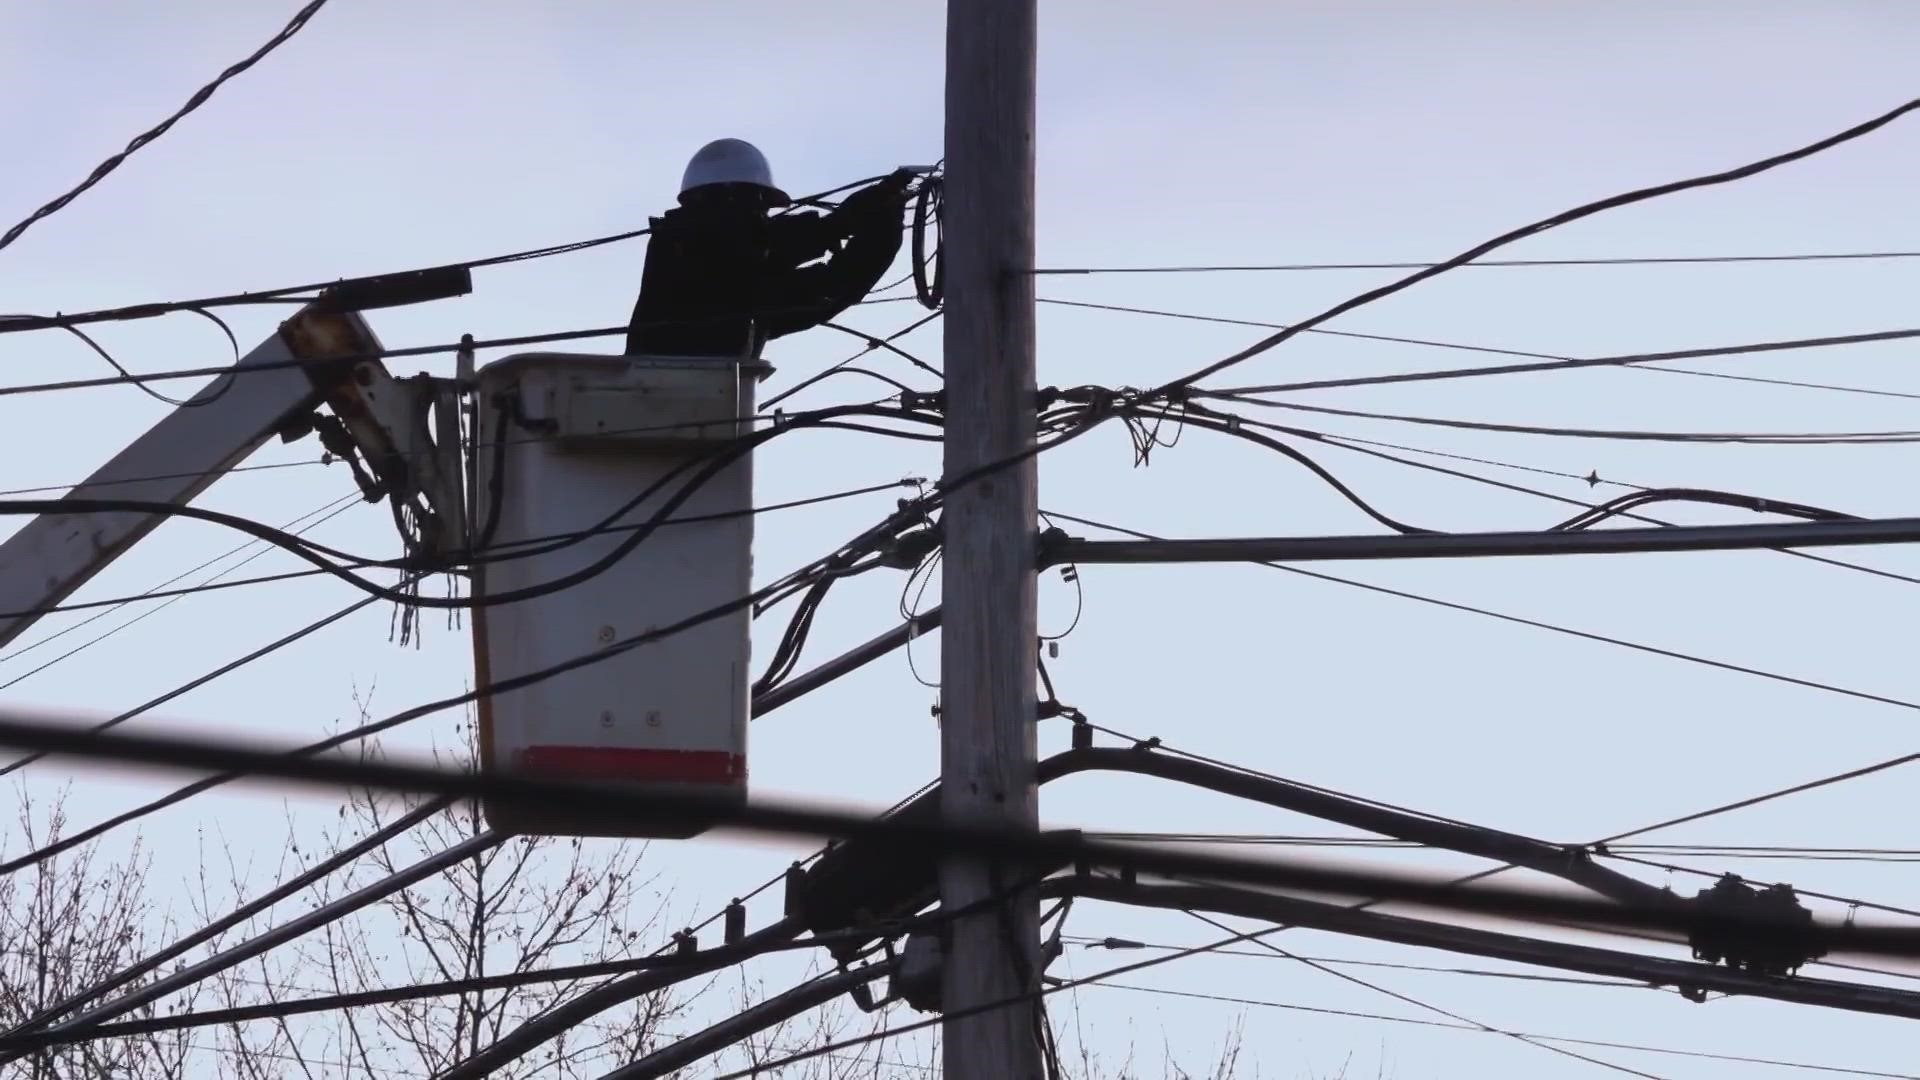 Winter weather worries. A look at if the power grid can weather cold and keep the electricity on.